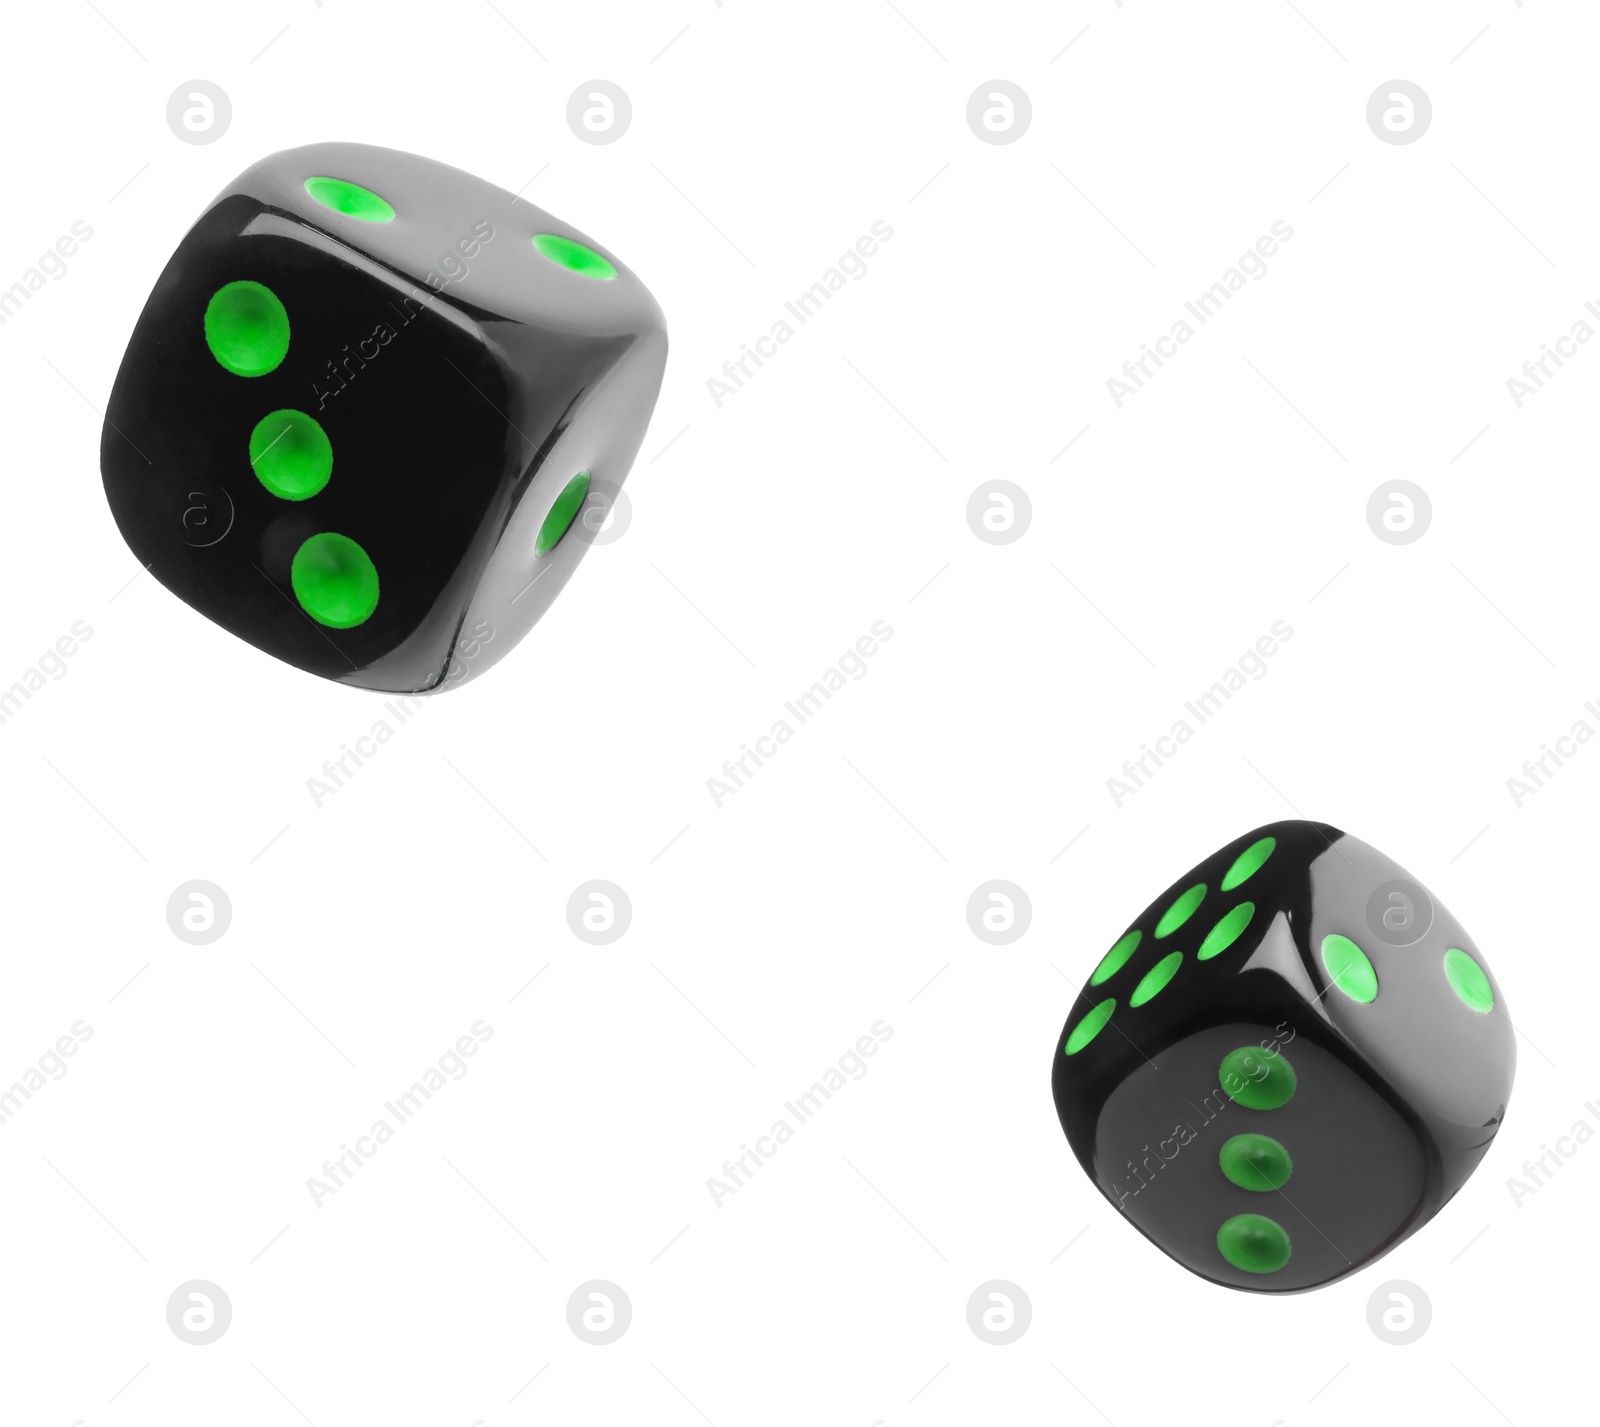 Image of Two black dice in air on white background